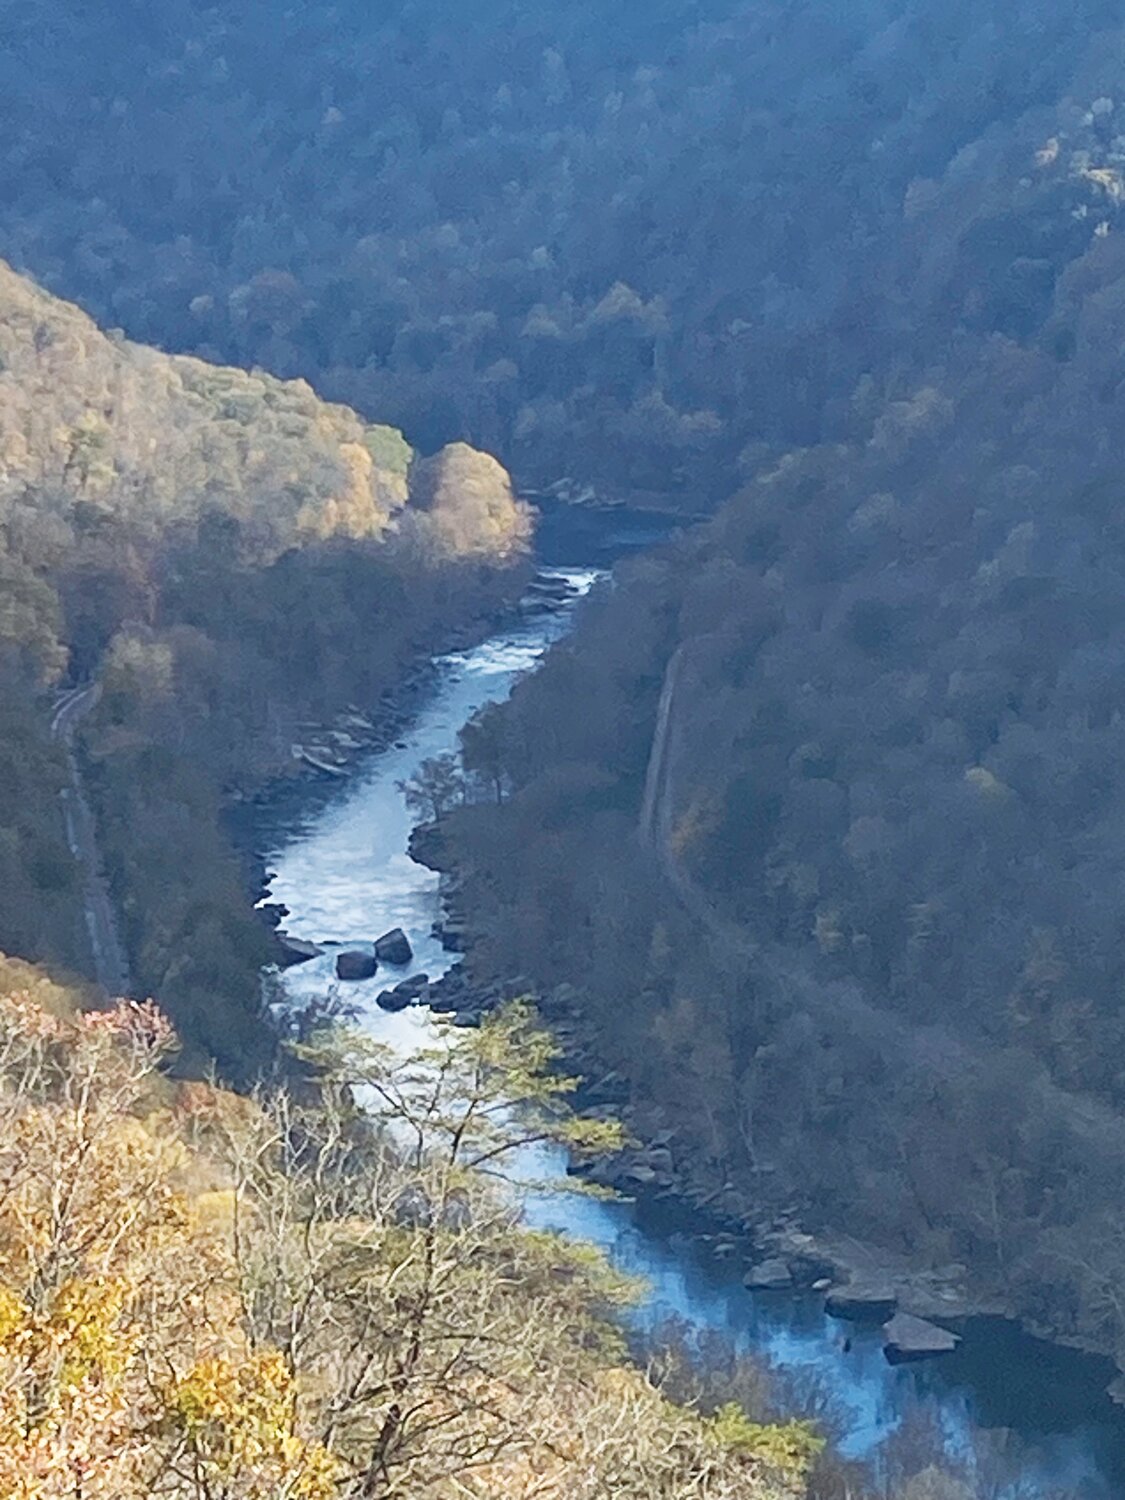 New River Gorge became a national river in 1978 and is home to recreational activities, including whitewater rafting, rock climbing, zip lining, hiking, fishing, hunting and mountain biking.